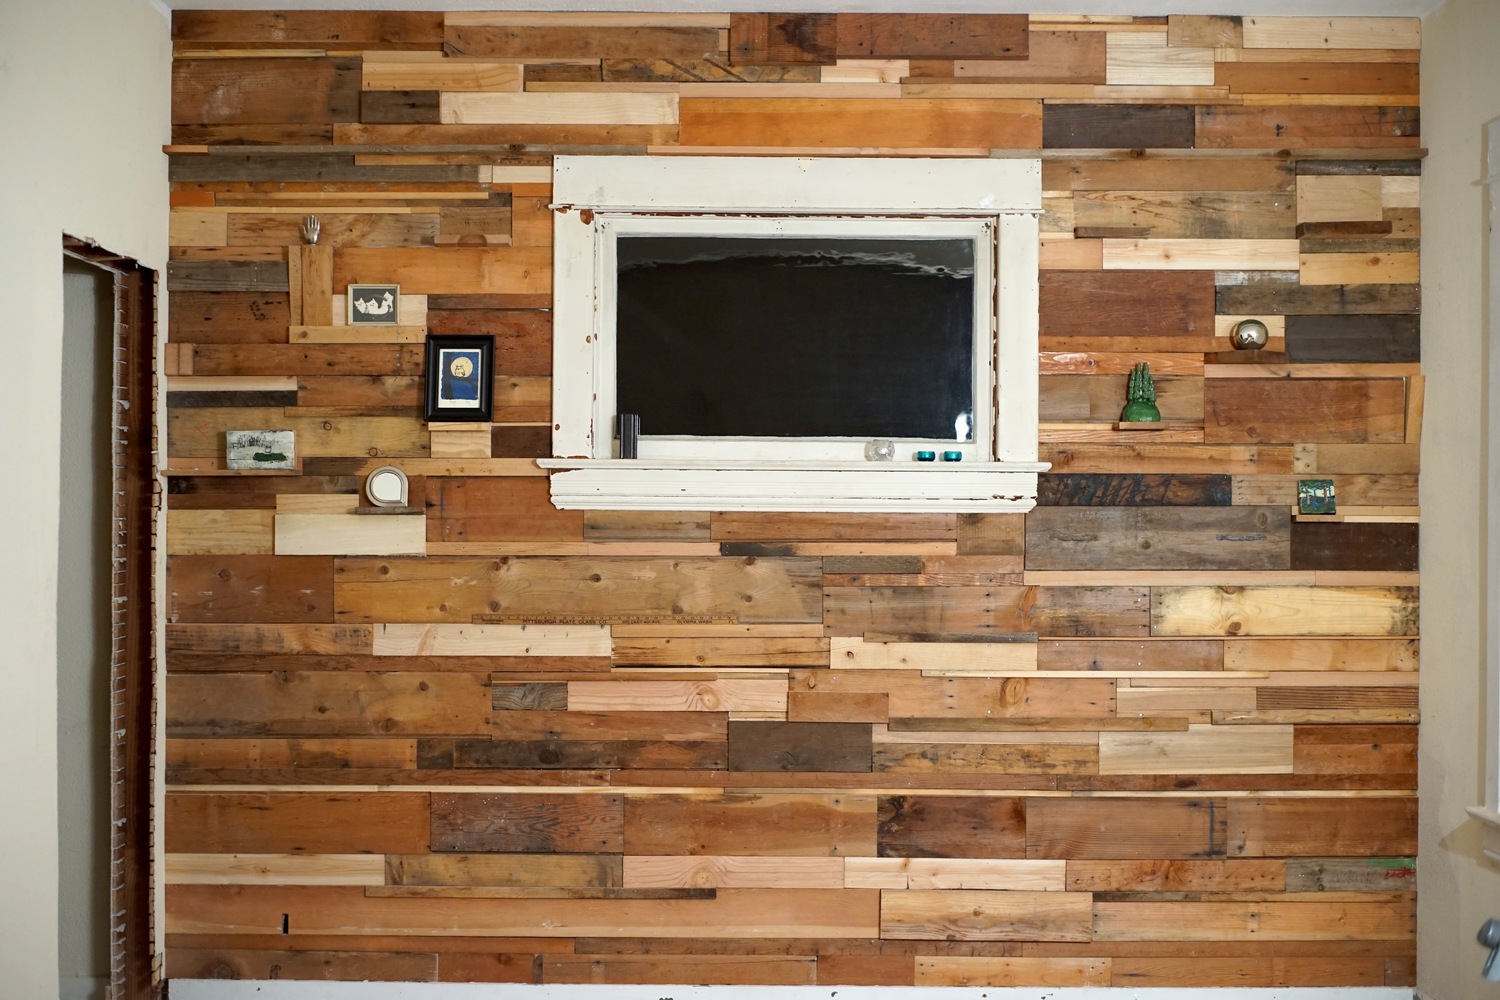 Start DIY home projects with salvage and reuse — Resourceful PDX